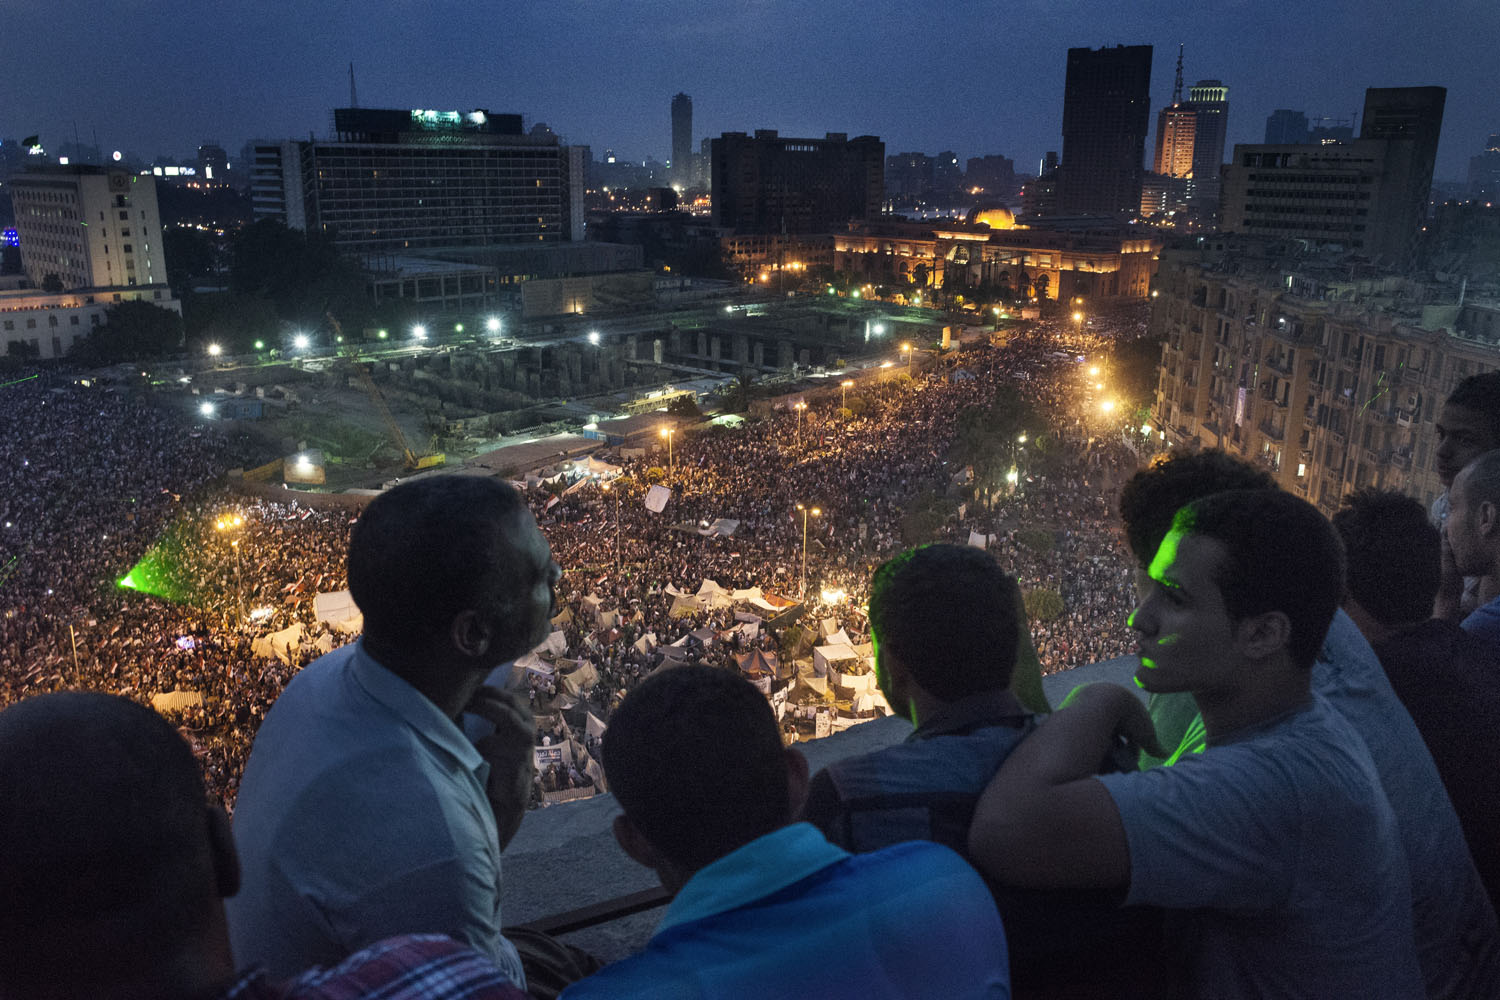 Massive demonstrations turned to celebration in and around Tahrir Square, Cairo, Egypt, July 3, 2013, as Egyptian President Mohamed Morsi was ousted by the military and taken into custody. Photograph by Yuri Kozyrev—NOOR for TIME